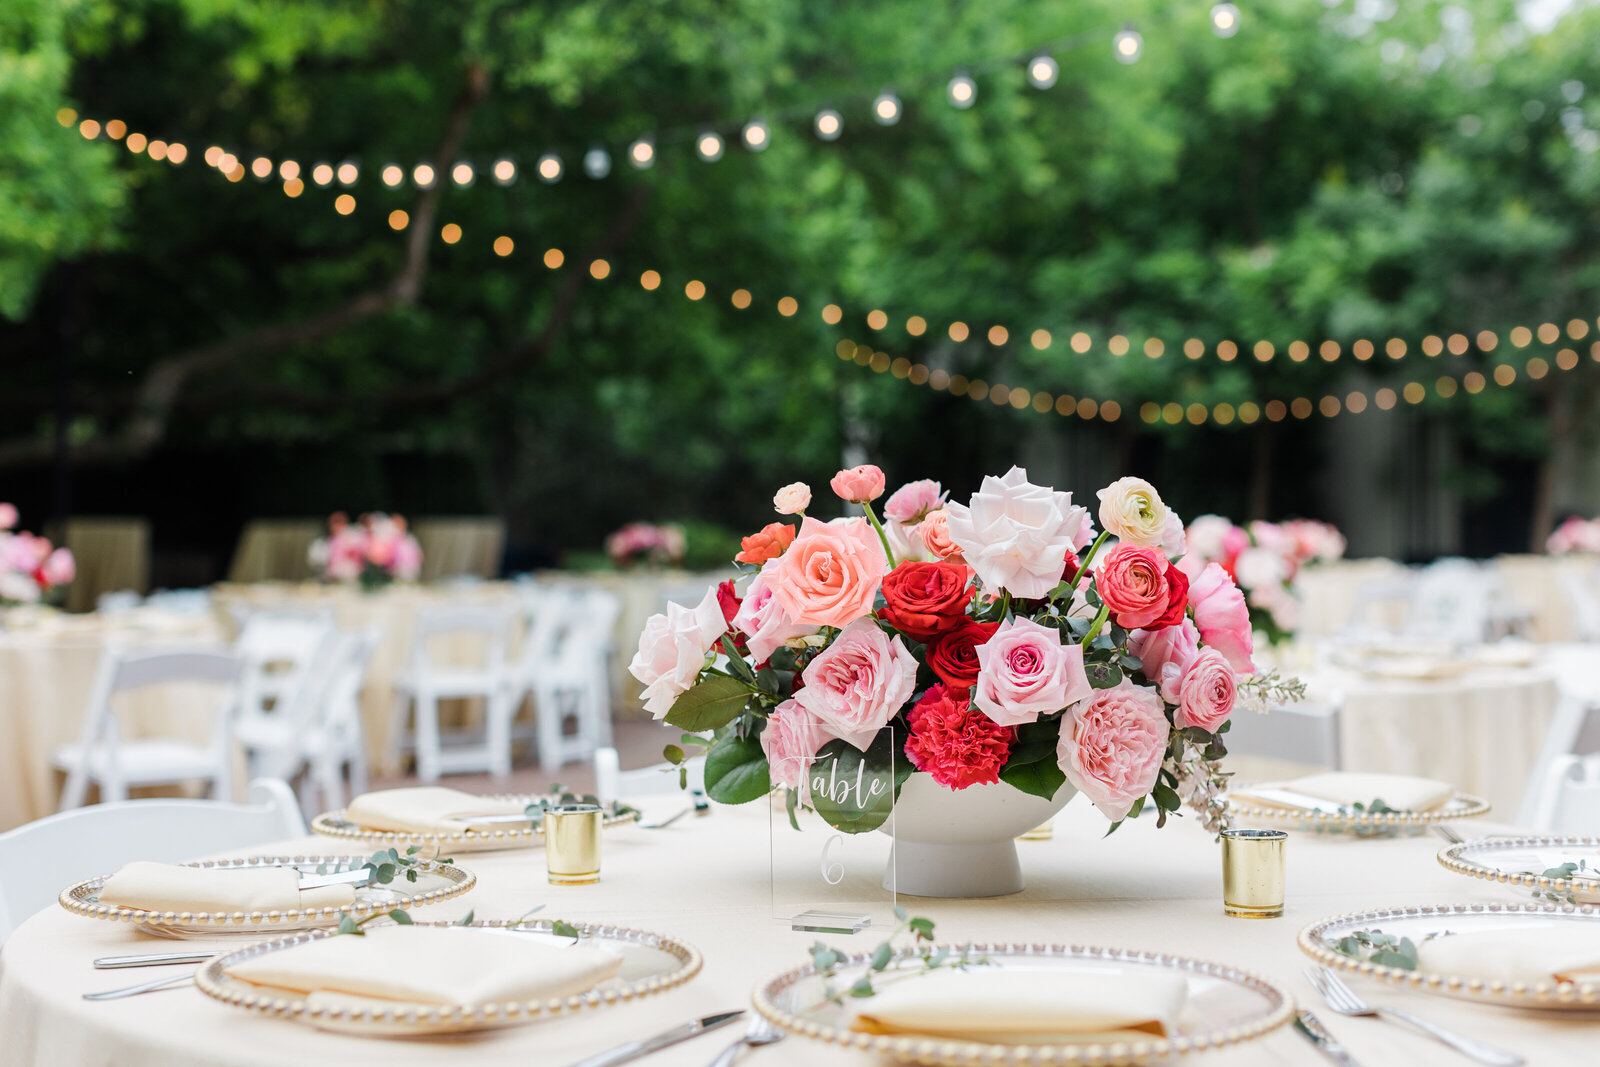 A wedding centerpiece of bold pink and red flowers sits on a table of plates, napkins, and glassware. It's springtime, so there are vibrant green trees in the background and softly lit cafe lights making tiny little orbs in the background.